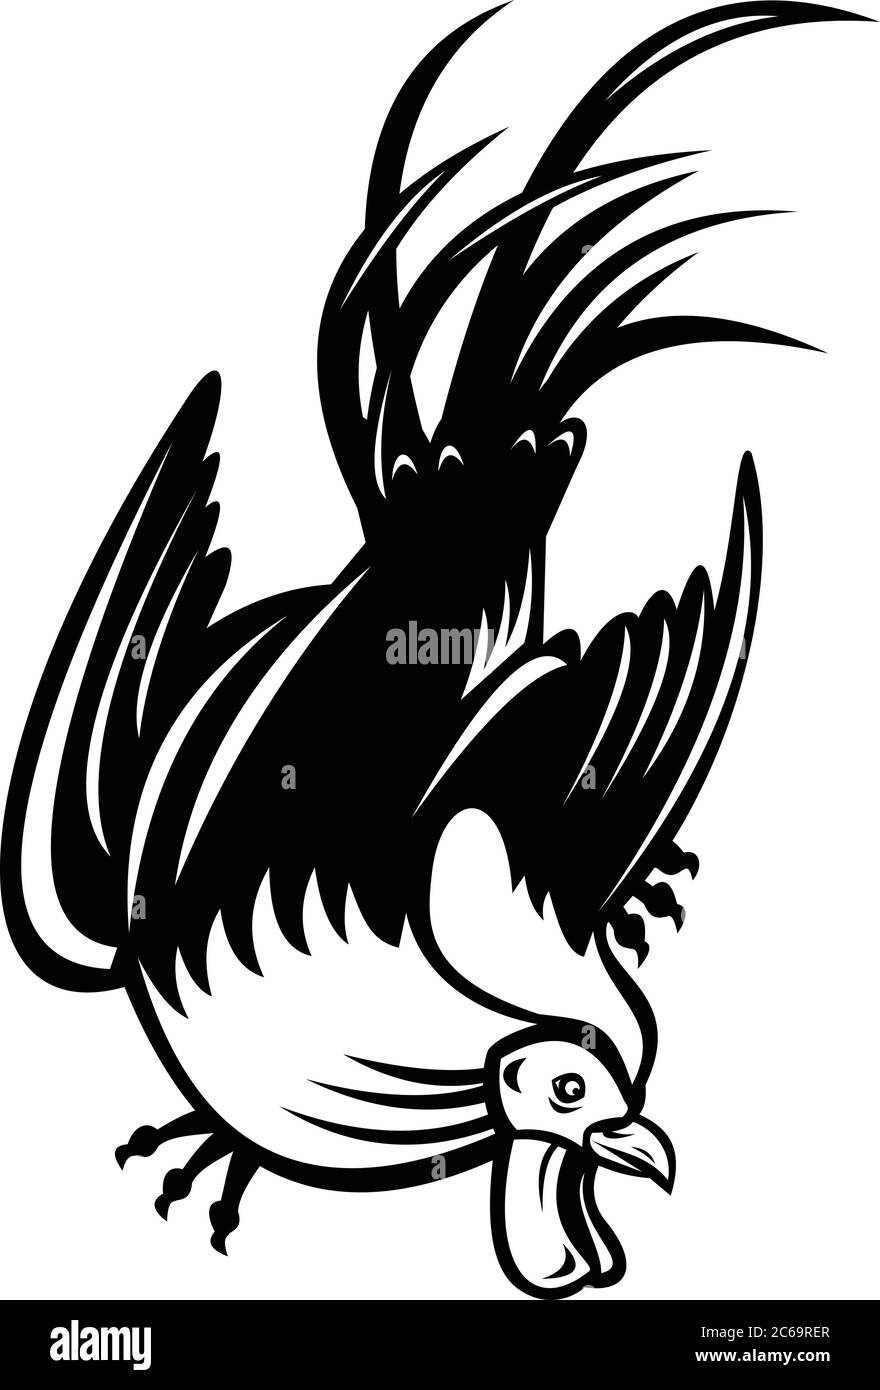 Retro style illustration of junglefowl, jungle fowl, cockerel or rooster in fighting stance viewed from low angle on isolated background in black and Stock Vector